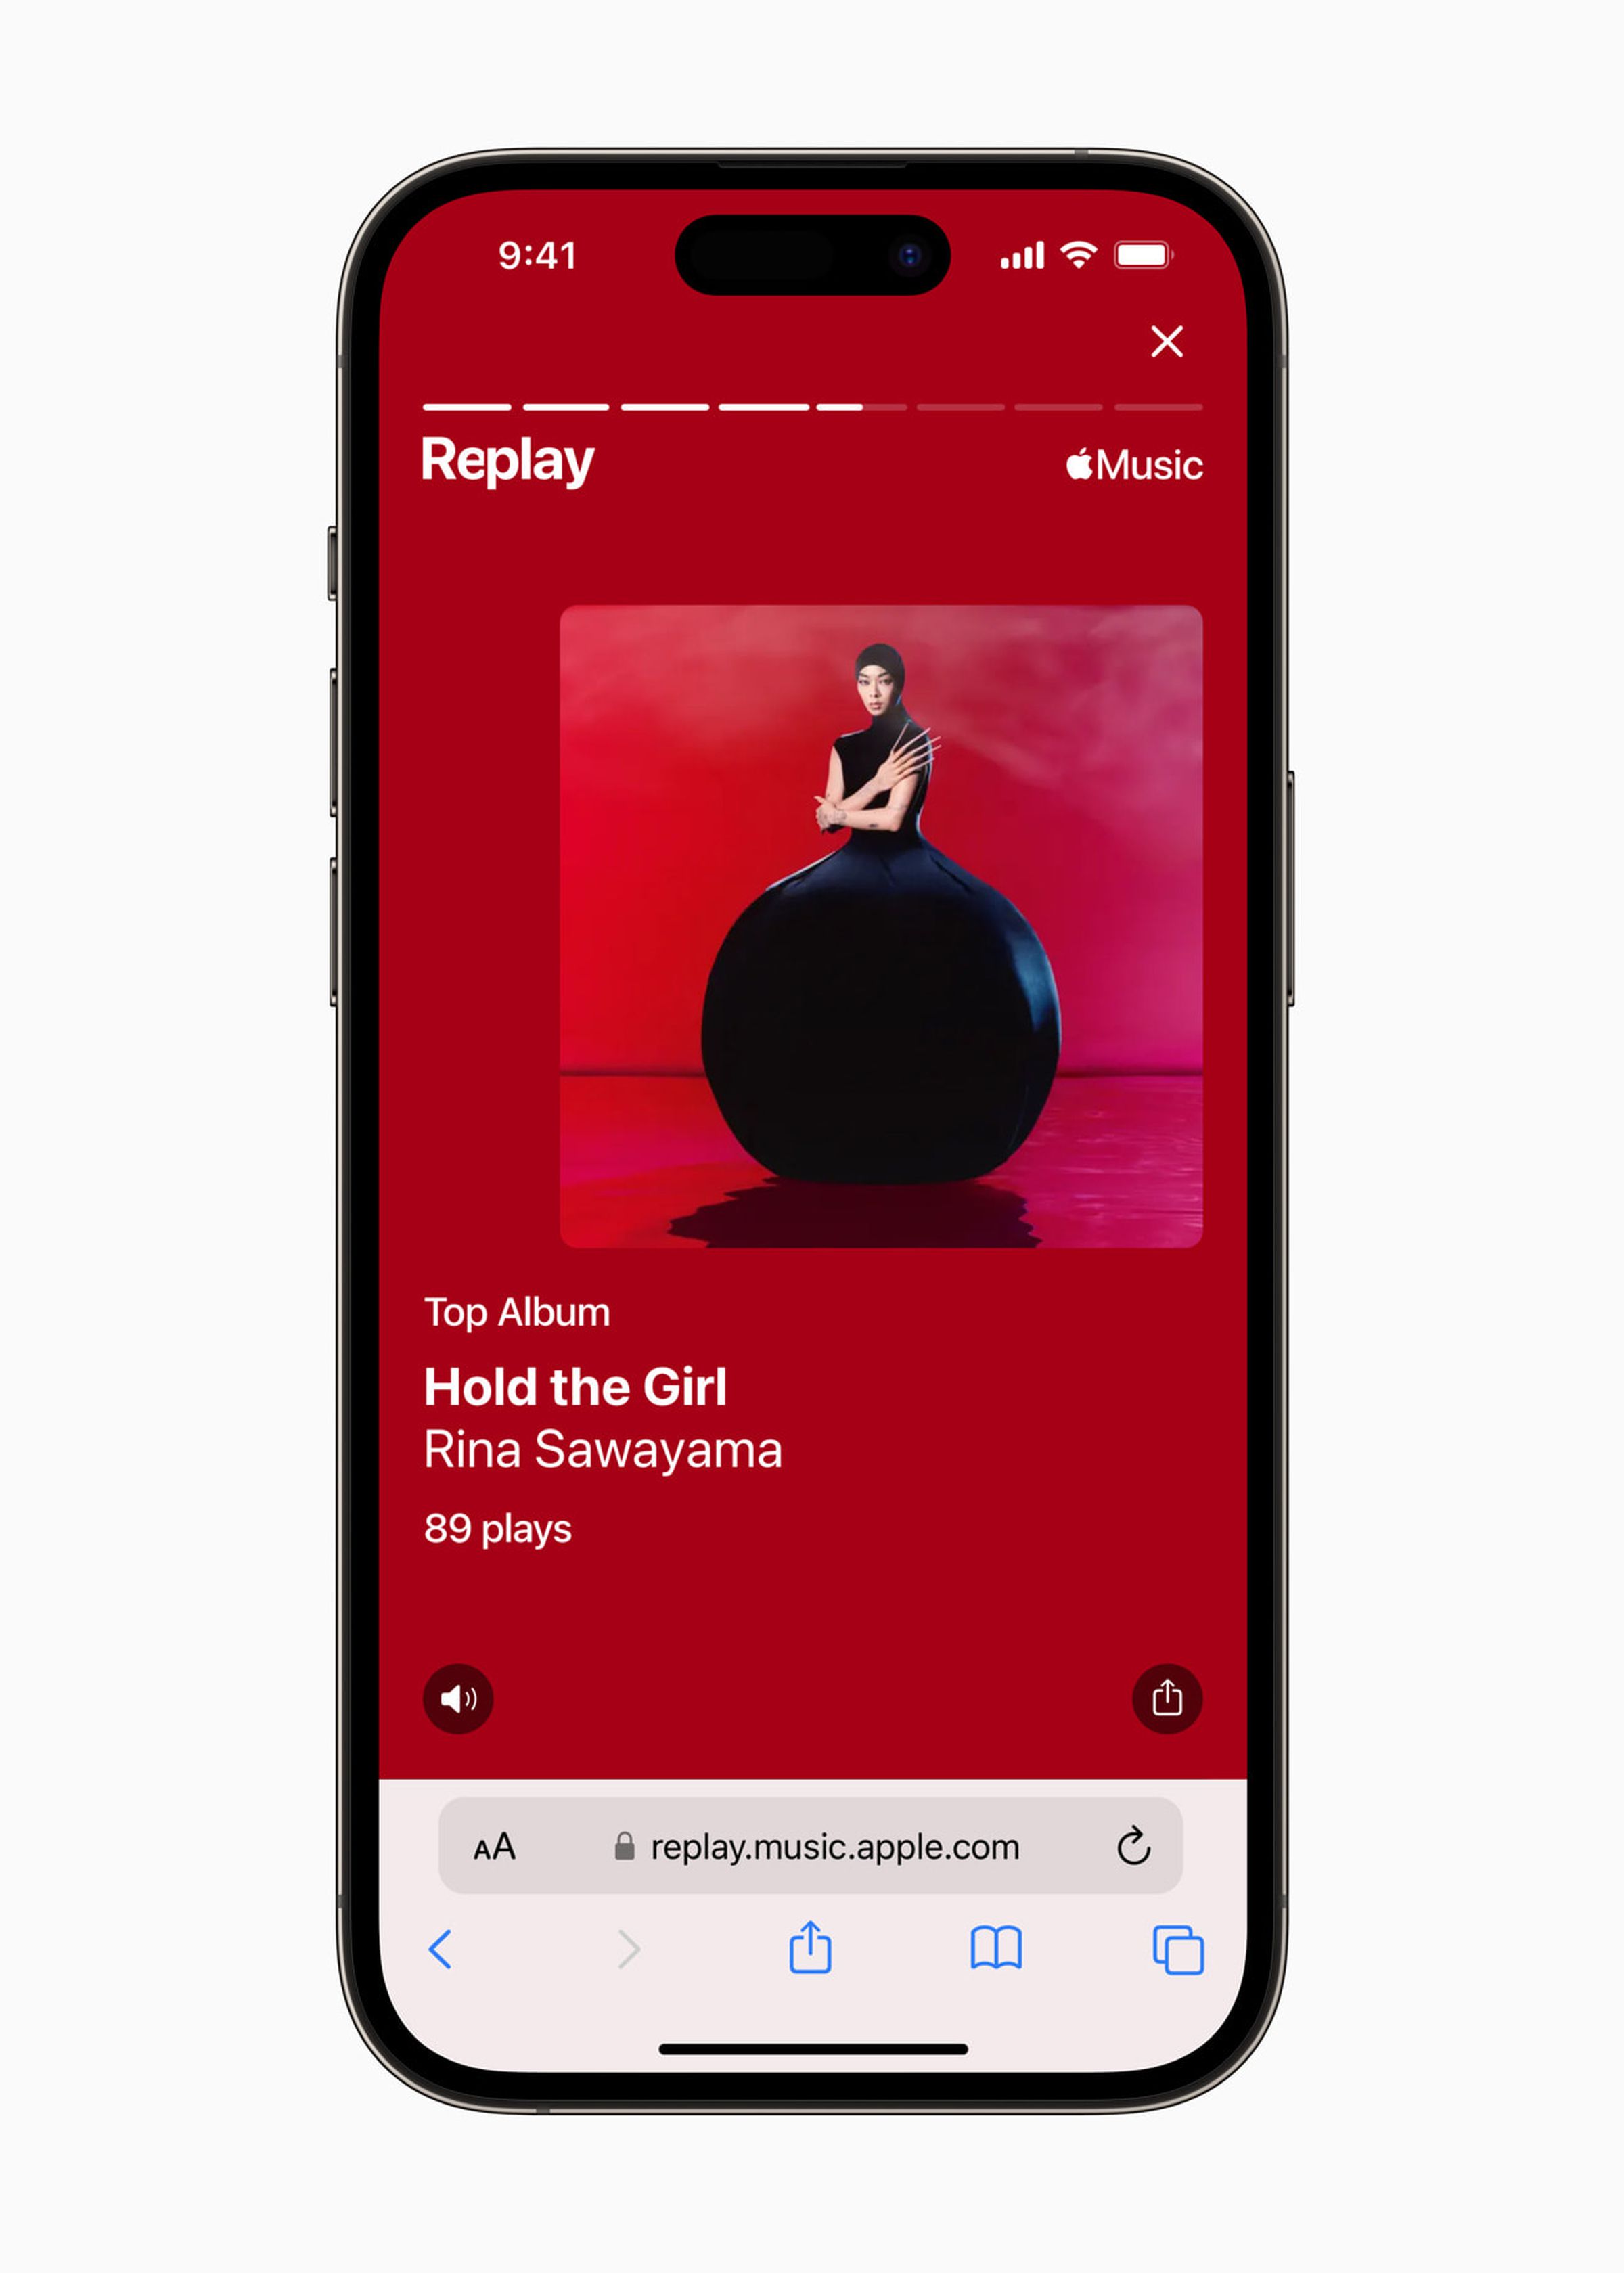 Apple Music Replay image features a listener’s top album, Hold the Girl by Rina Sawayama.